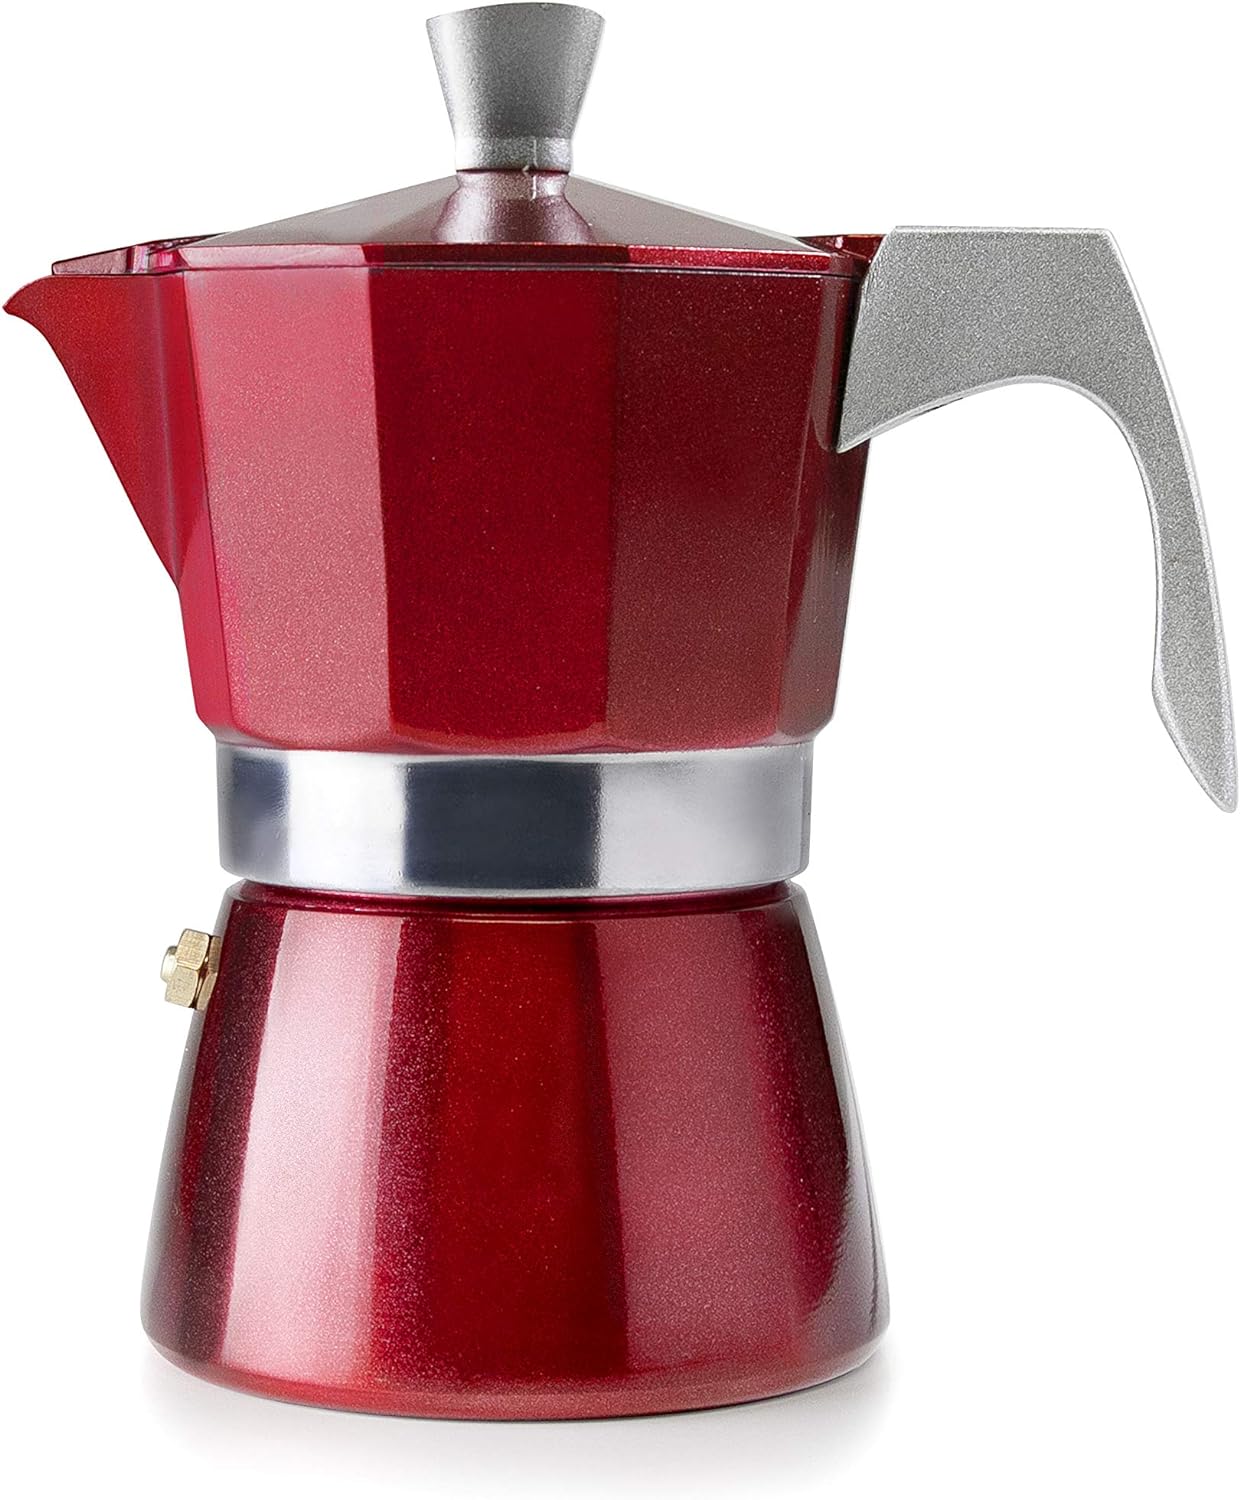 Ibili - Express coffee cooker Evva Red, 9 cups, 450 ml, die -cast aluminum, suitable for induction foci